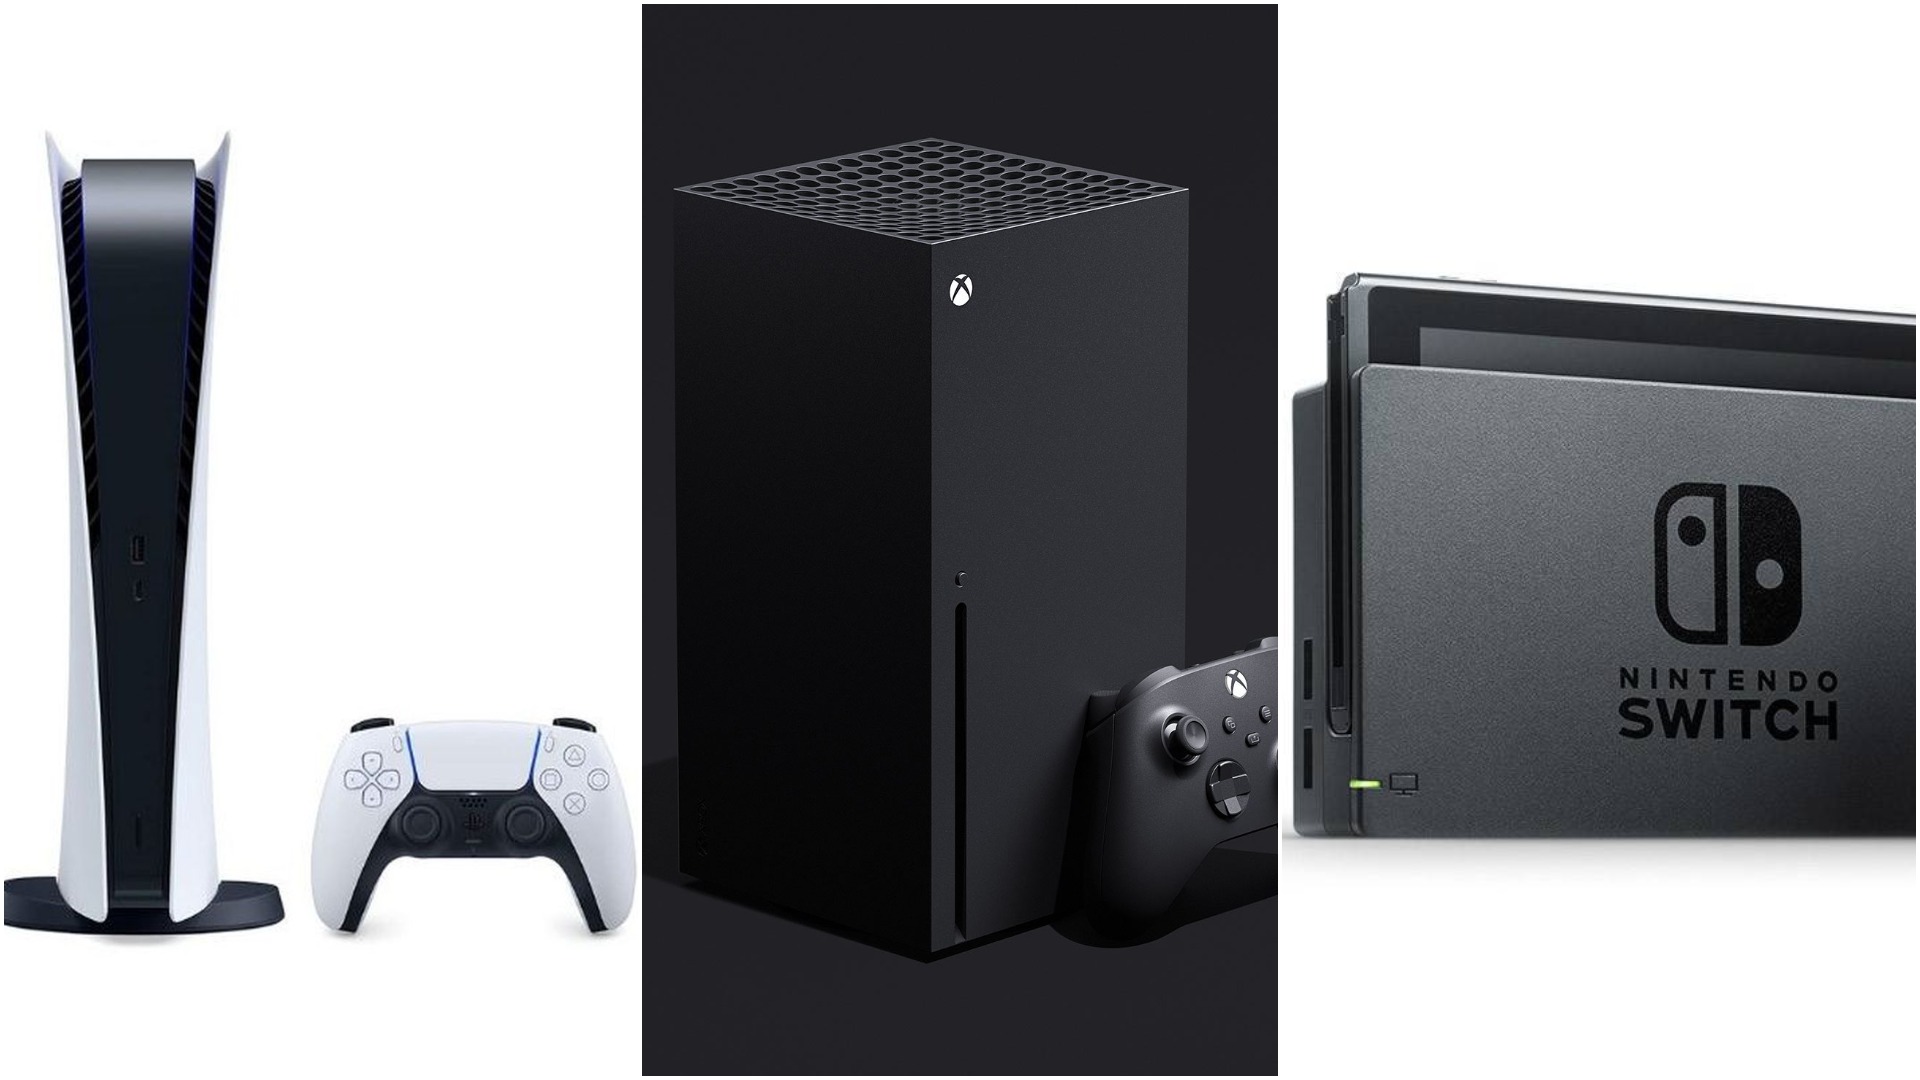 PS5 vs. Nintendo Switch: Which should you buy?